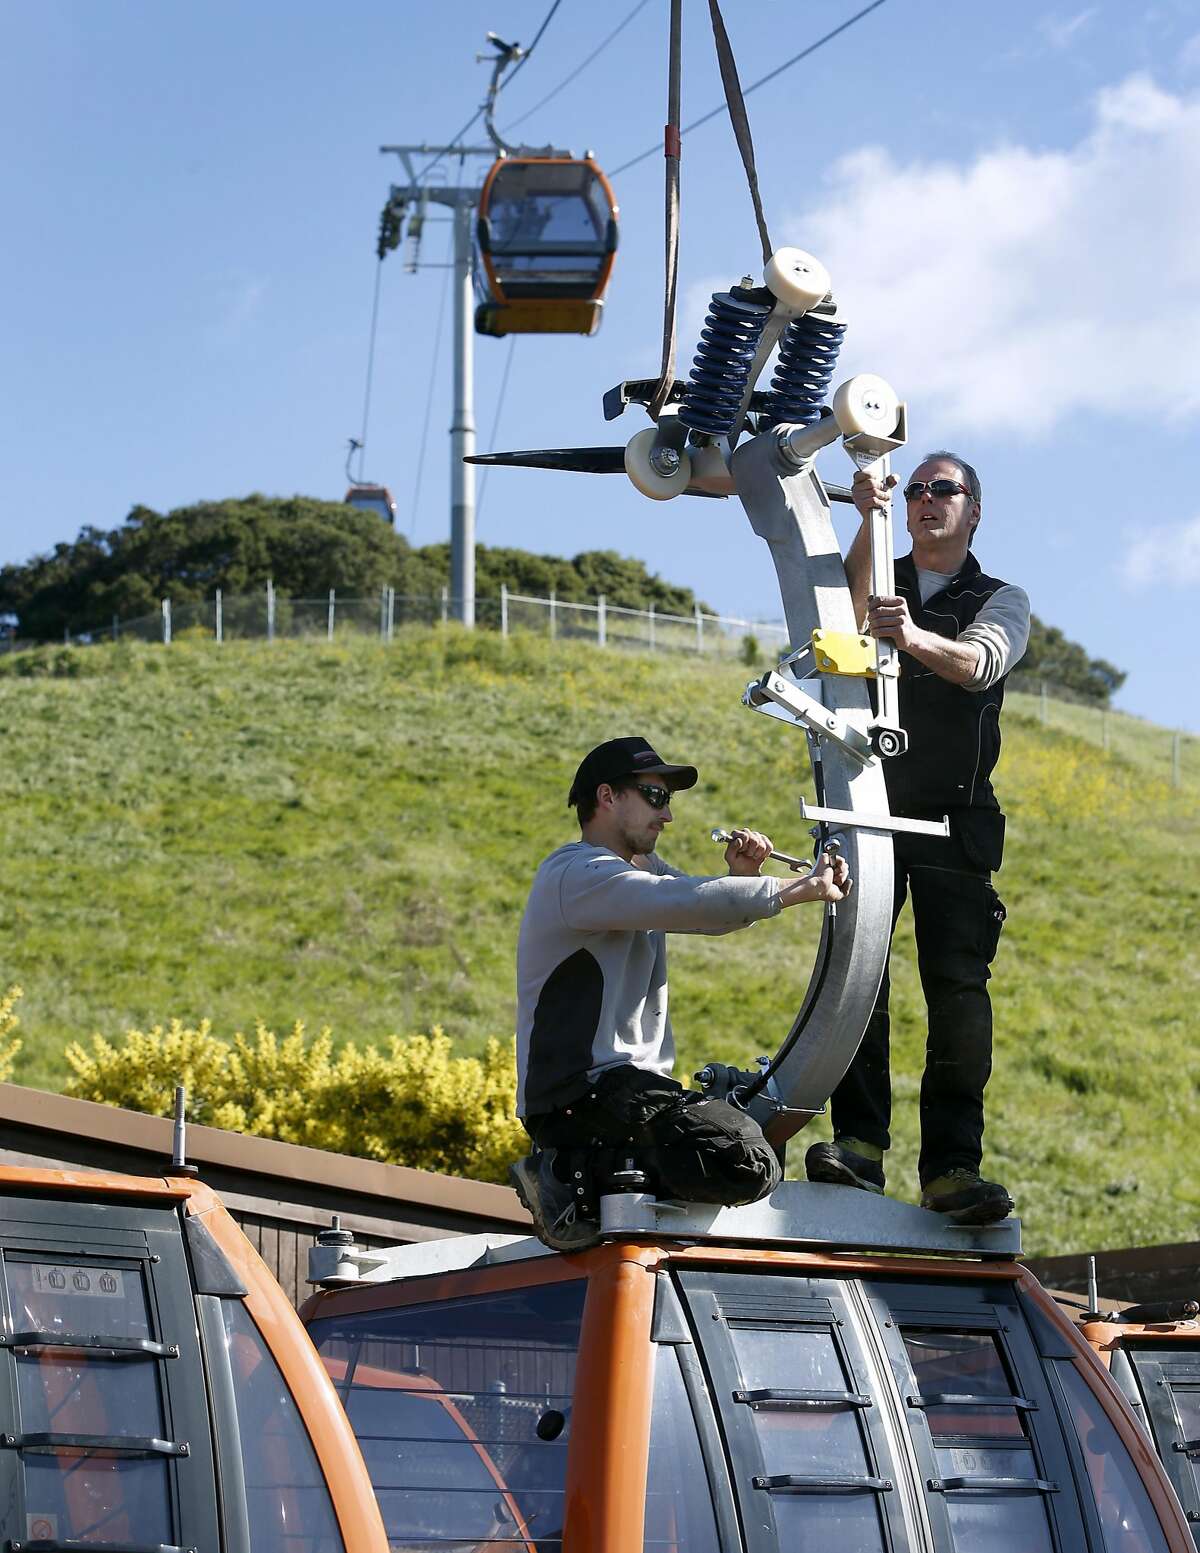 Severin Karter (left) and Martin Moser connect an arm onto the top of a cabin before it's suspended from a gondola system that will carry visitors to the Oakland Zoo's new California Trail exhibit in Oakland, Calif. on Thursday, Feb. 23, 2017. The gondola and restaurant, with a sweeping view of the Bay Area, is scheduled to open in June of this year with the entire exhibit inhabited with native California creatures slated to open in 2018.